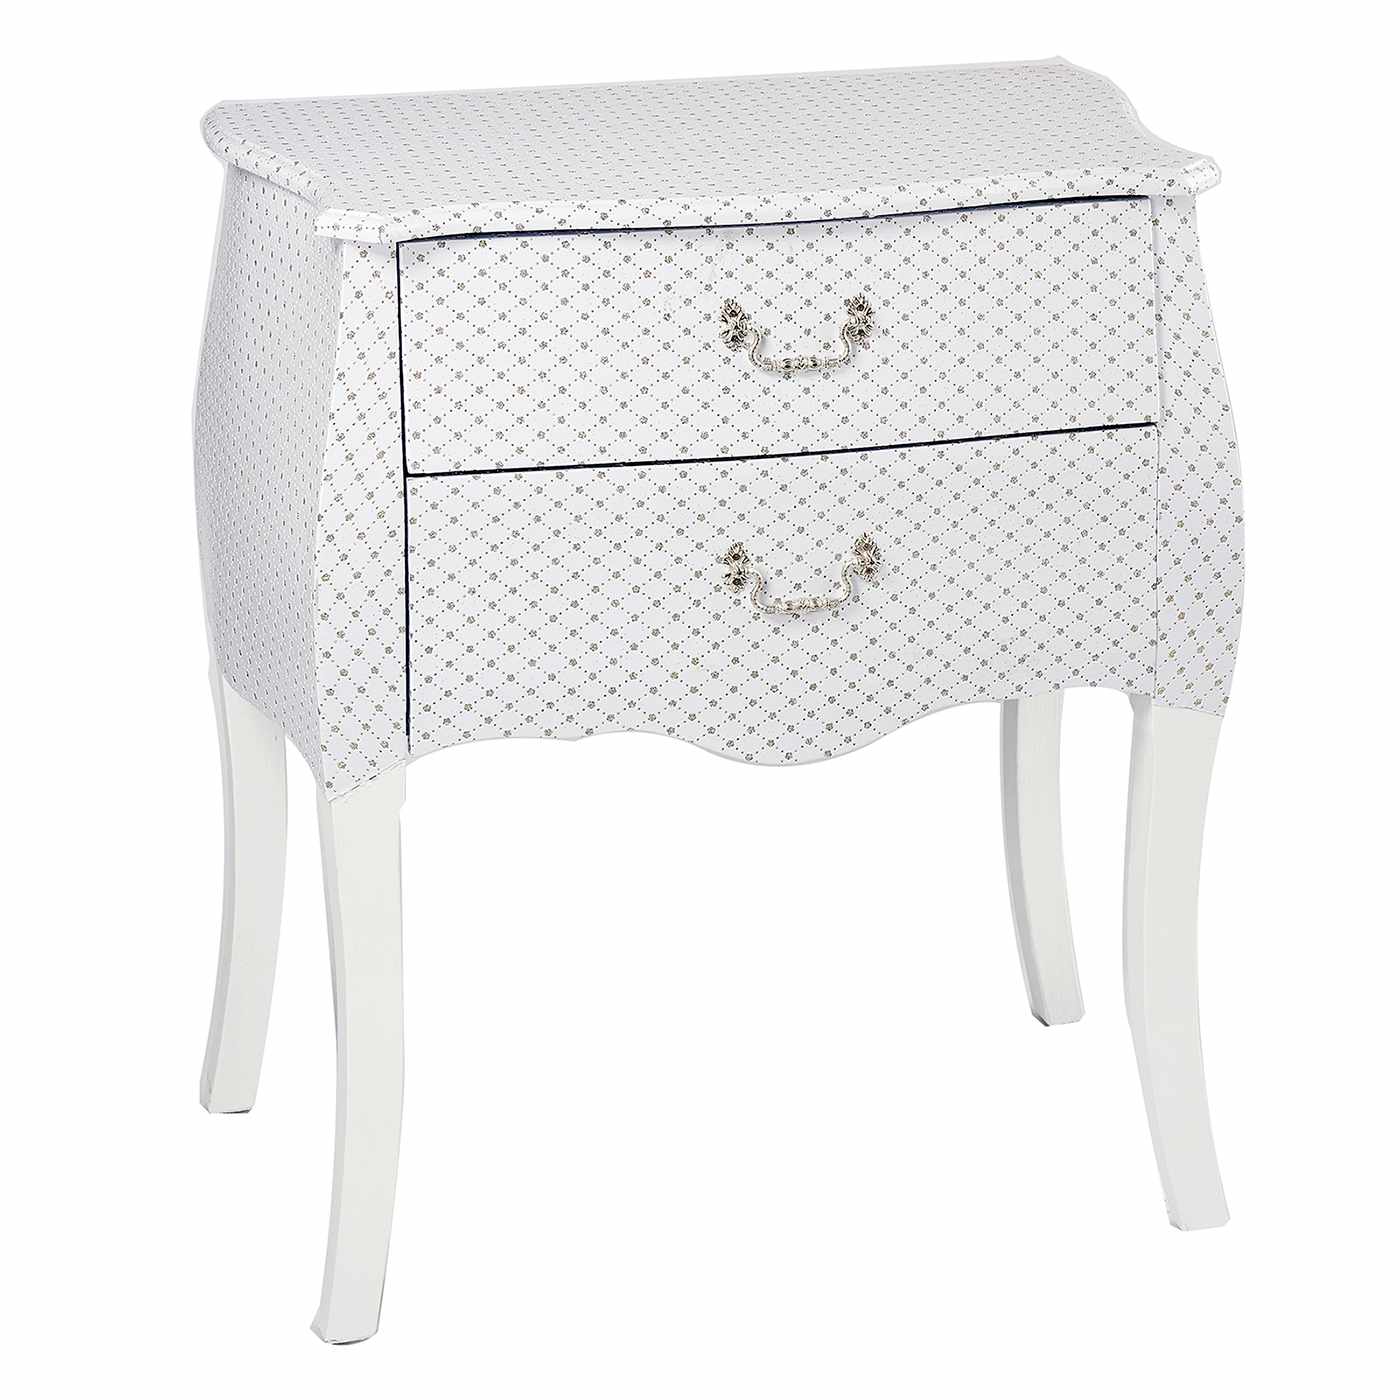 White Bedside Table with Drawers Wholesale SJ16312